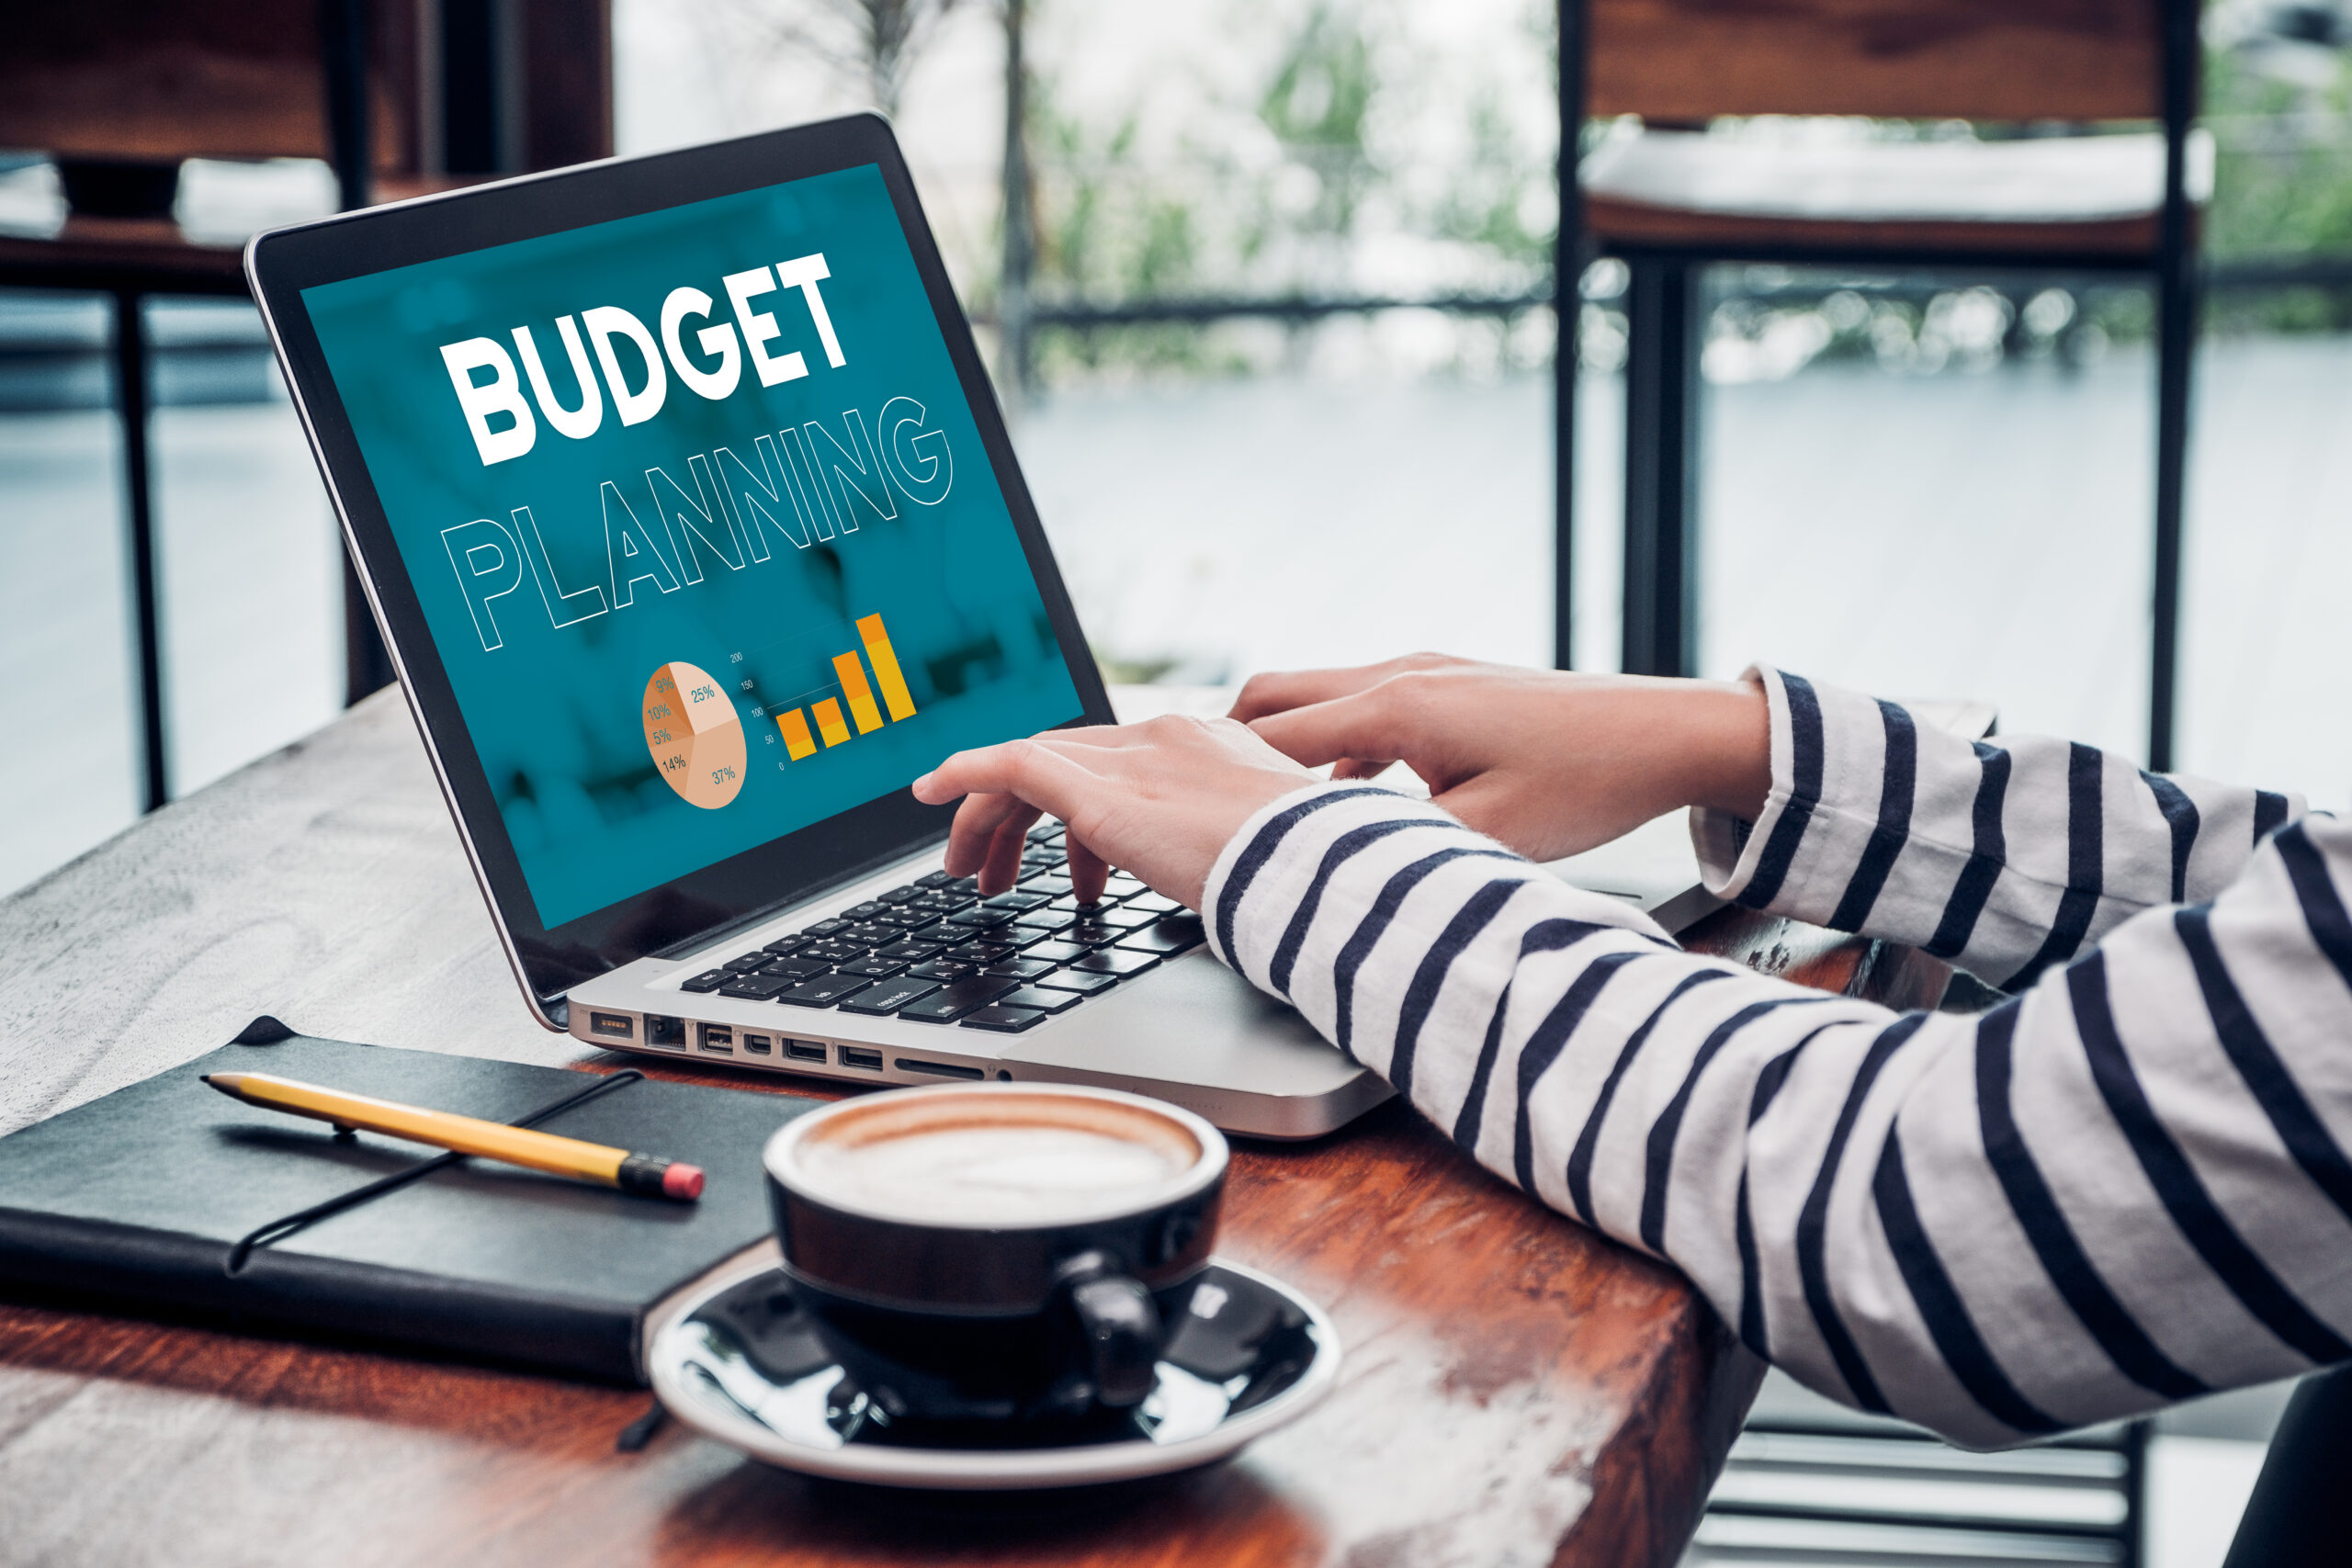 A person works on a laptop with the screen showing a budget planning graphic.